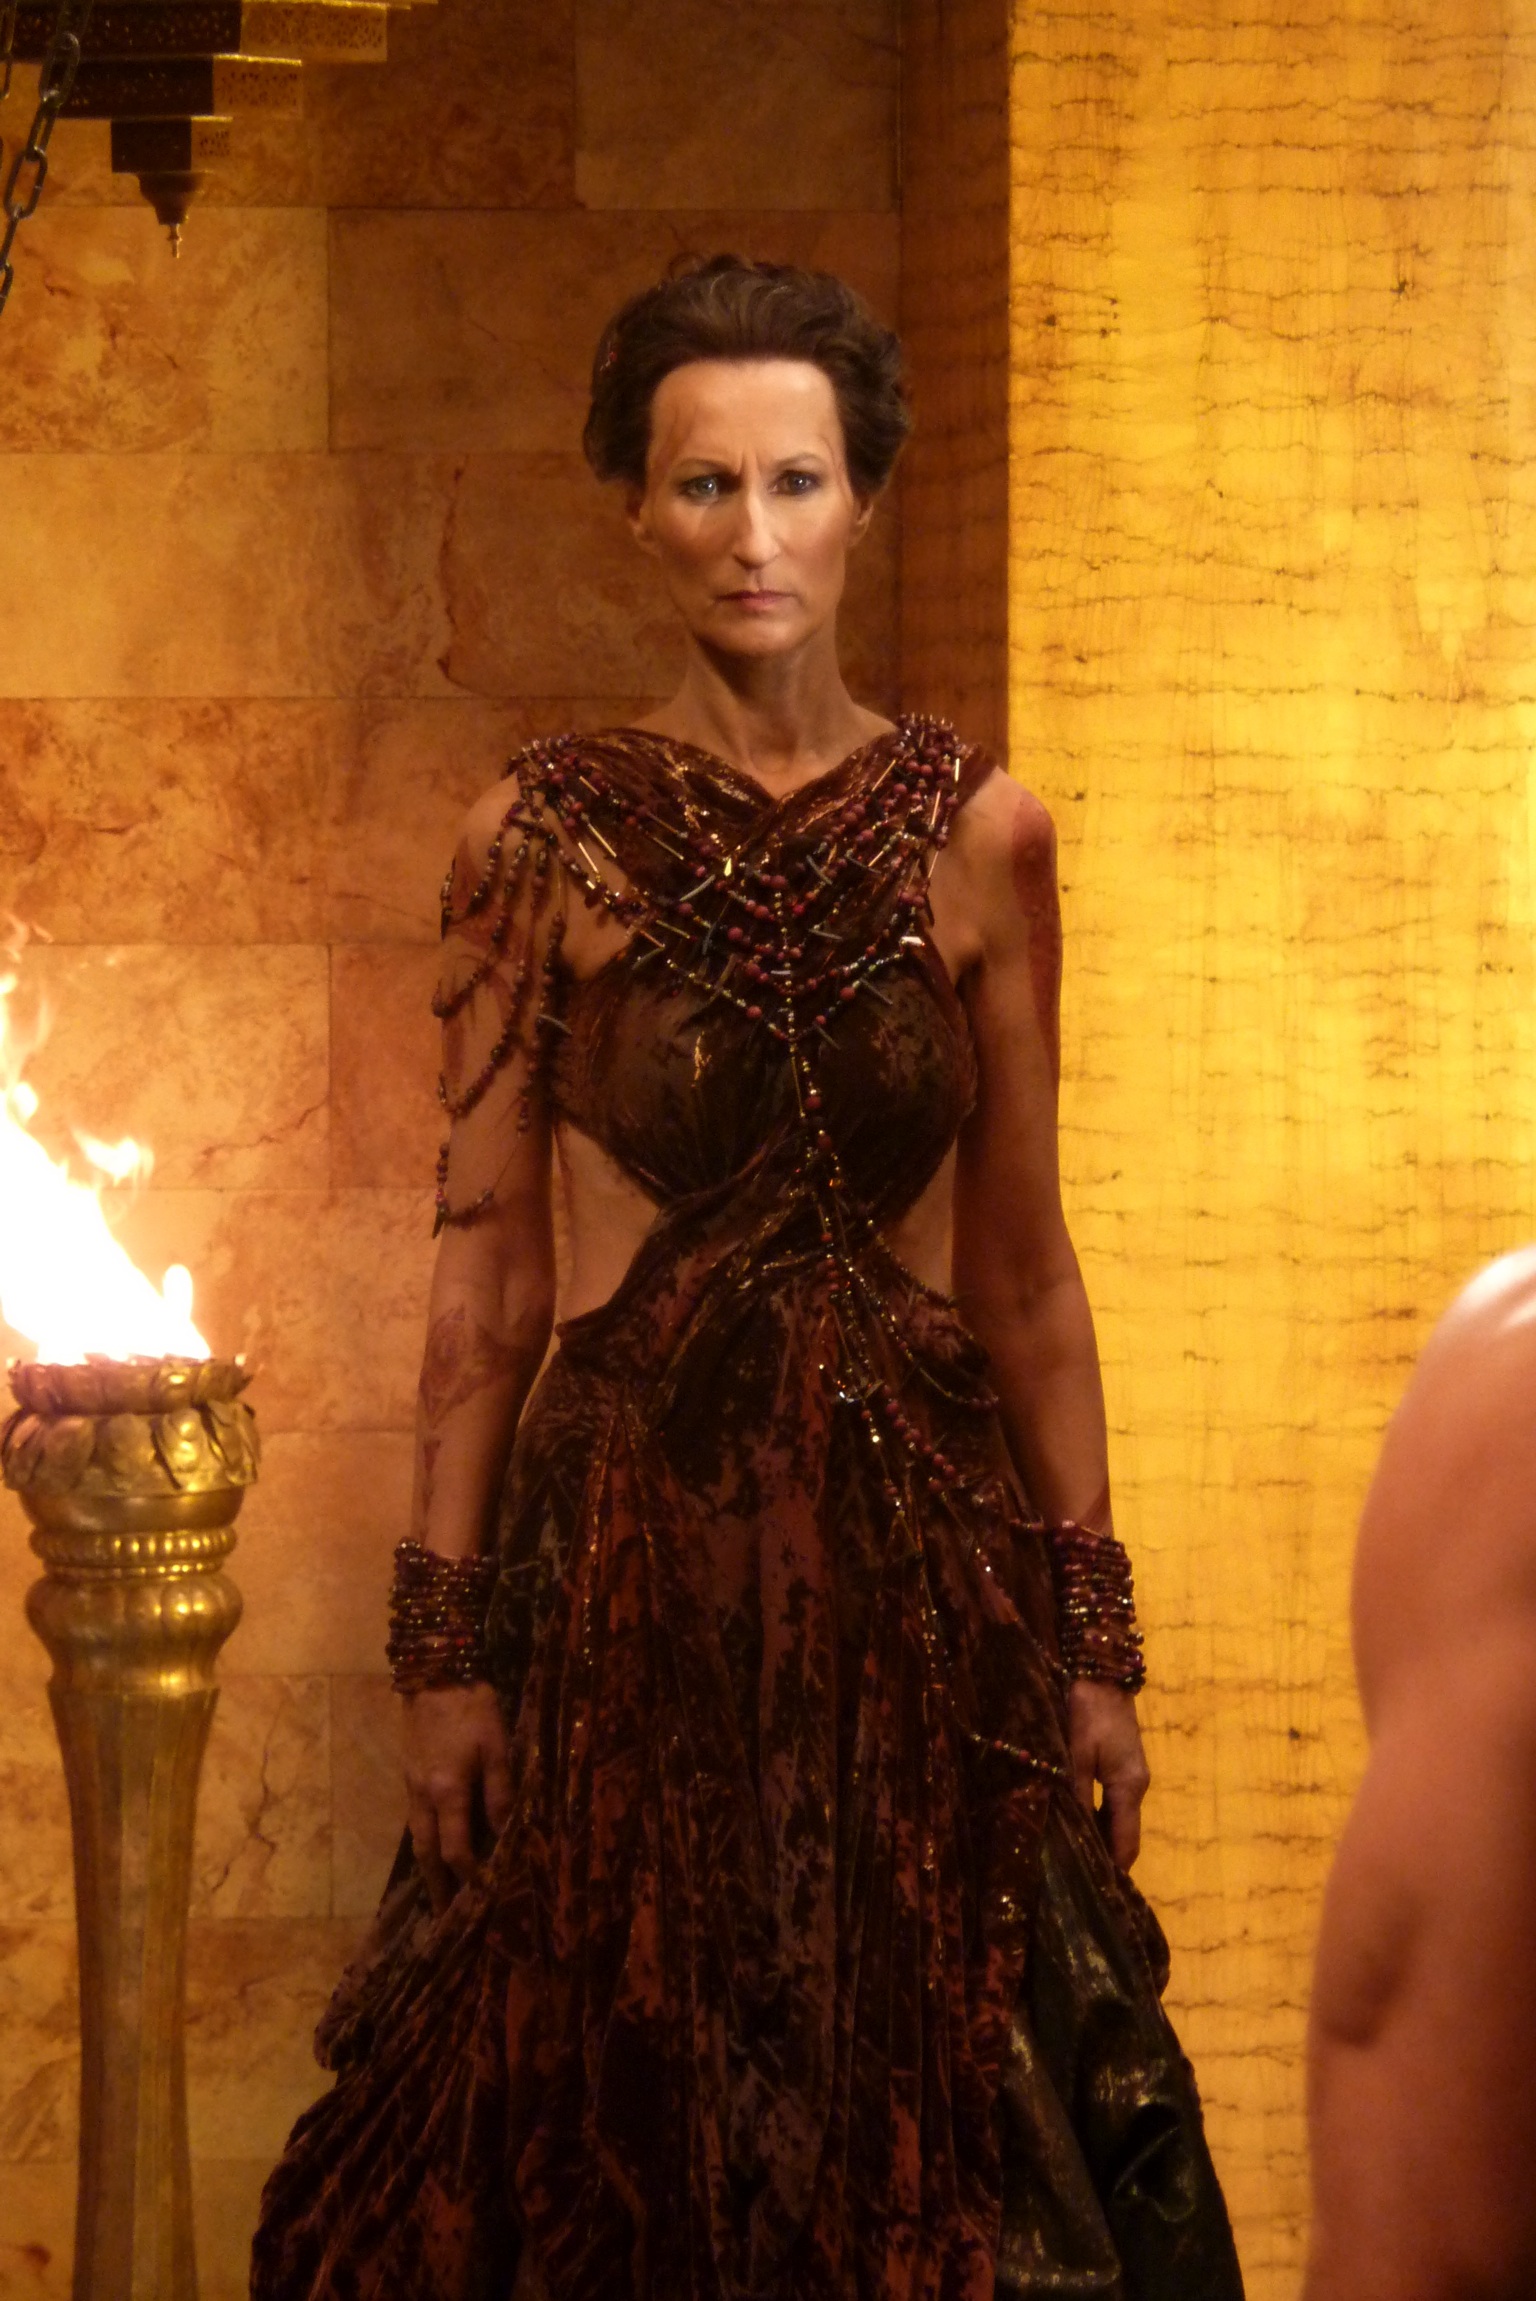 Cate Fowler as Matron of the Chamber in John Carter of Mars